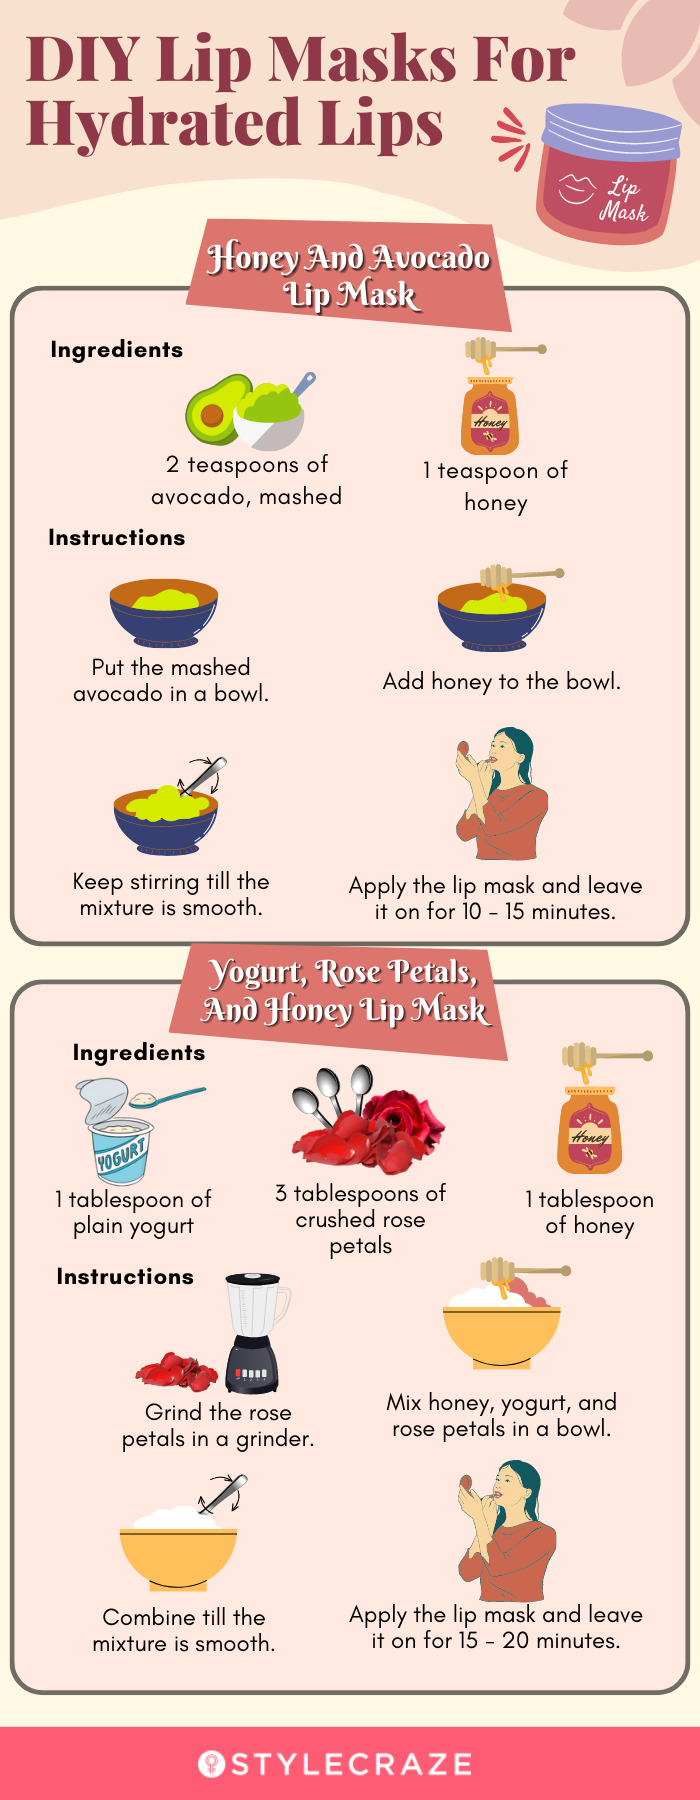 diy lip masks for hydrated lips [infographic]